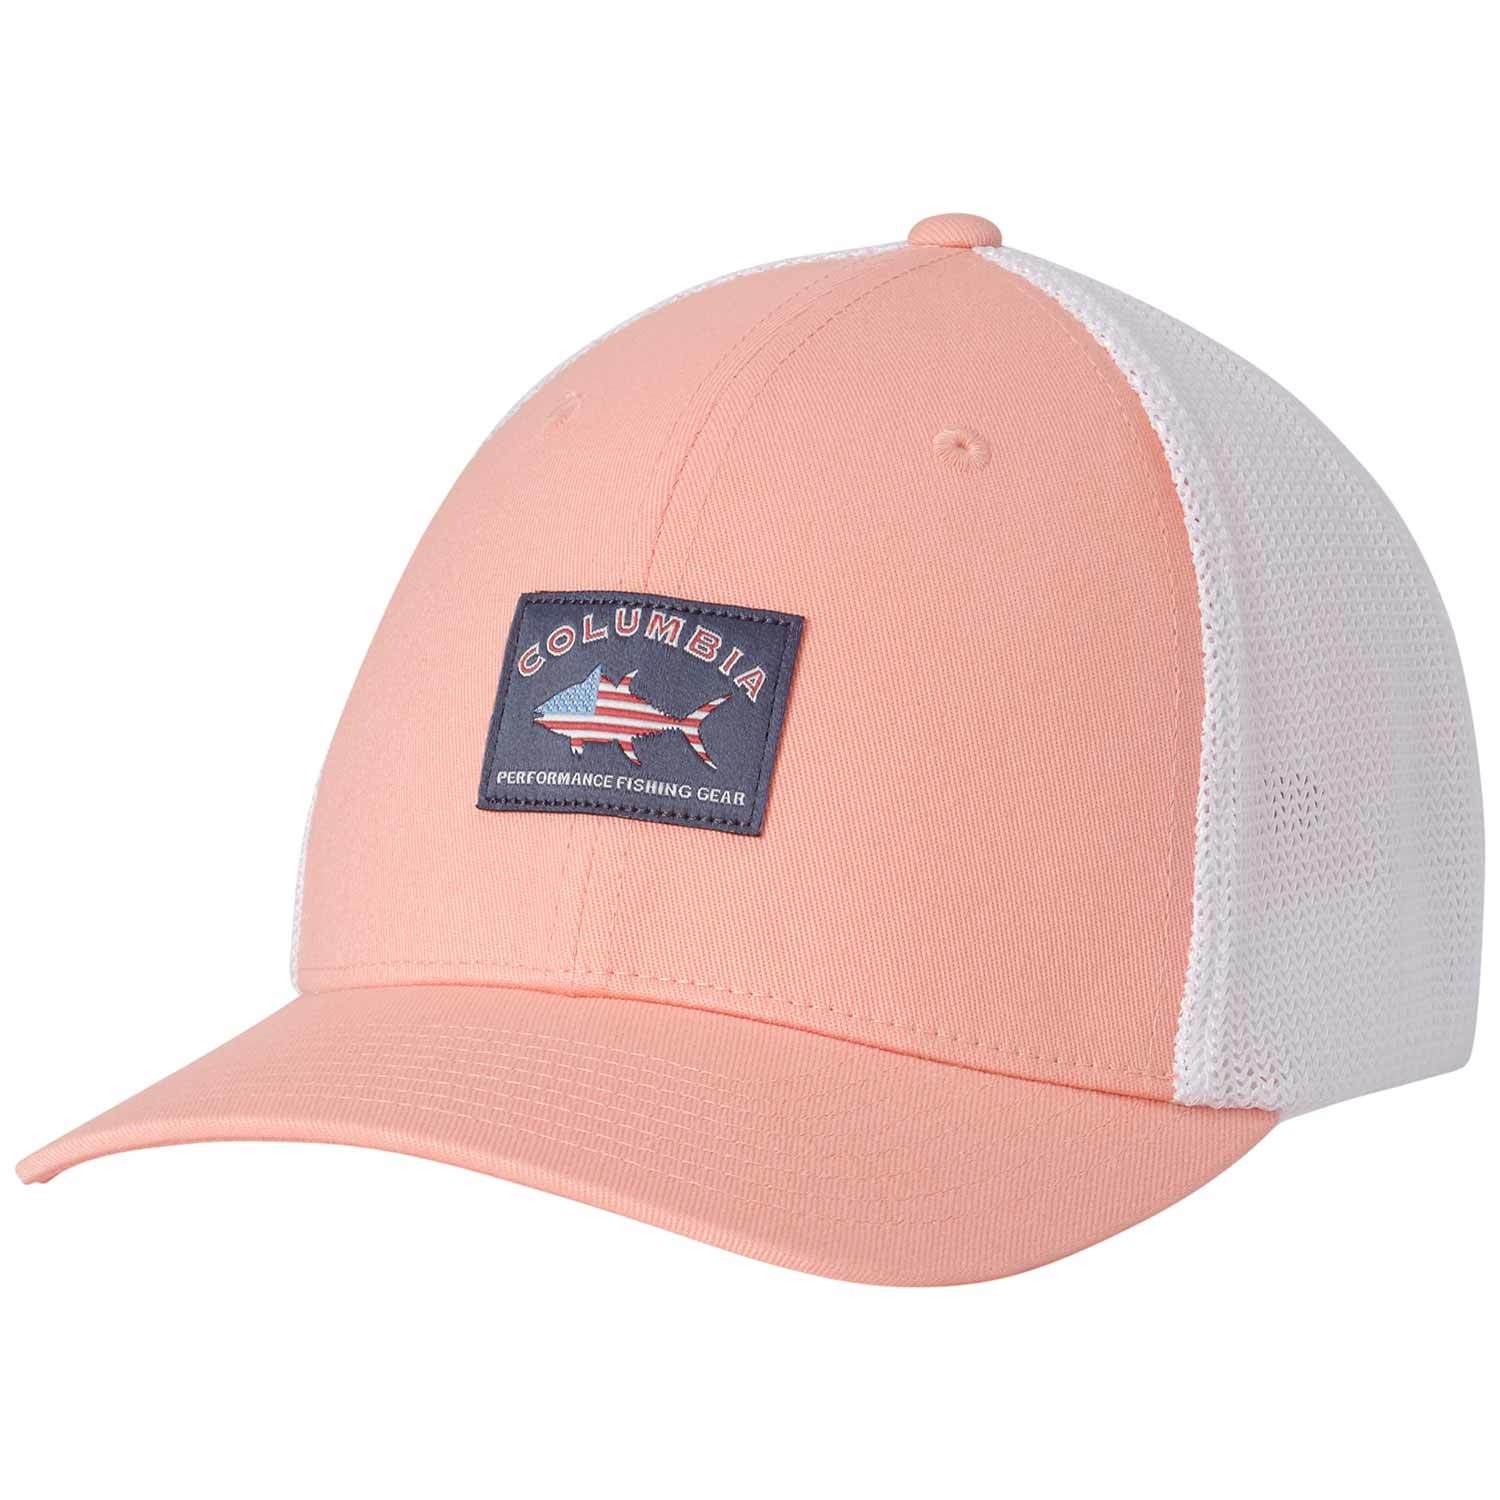 Cotton Vented Trail Hat — Oatmeal, Large, Model# SPF3